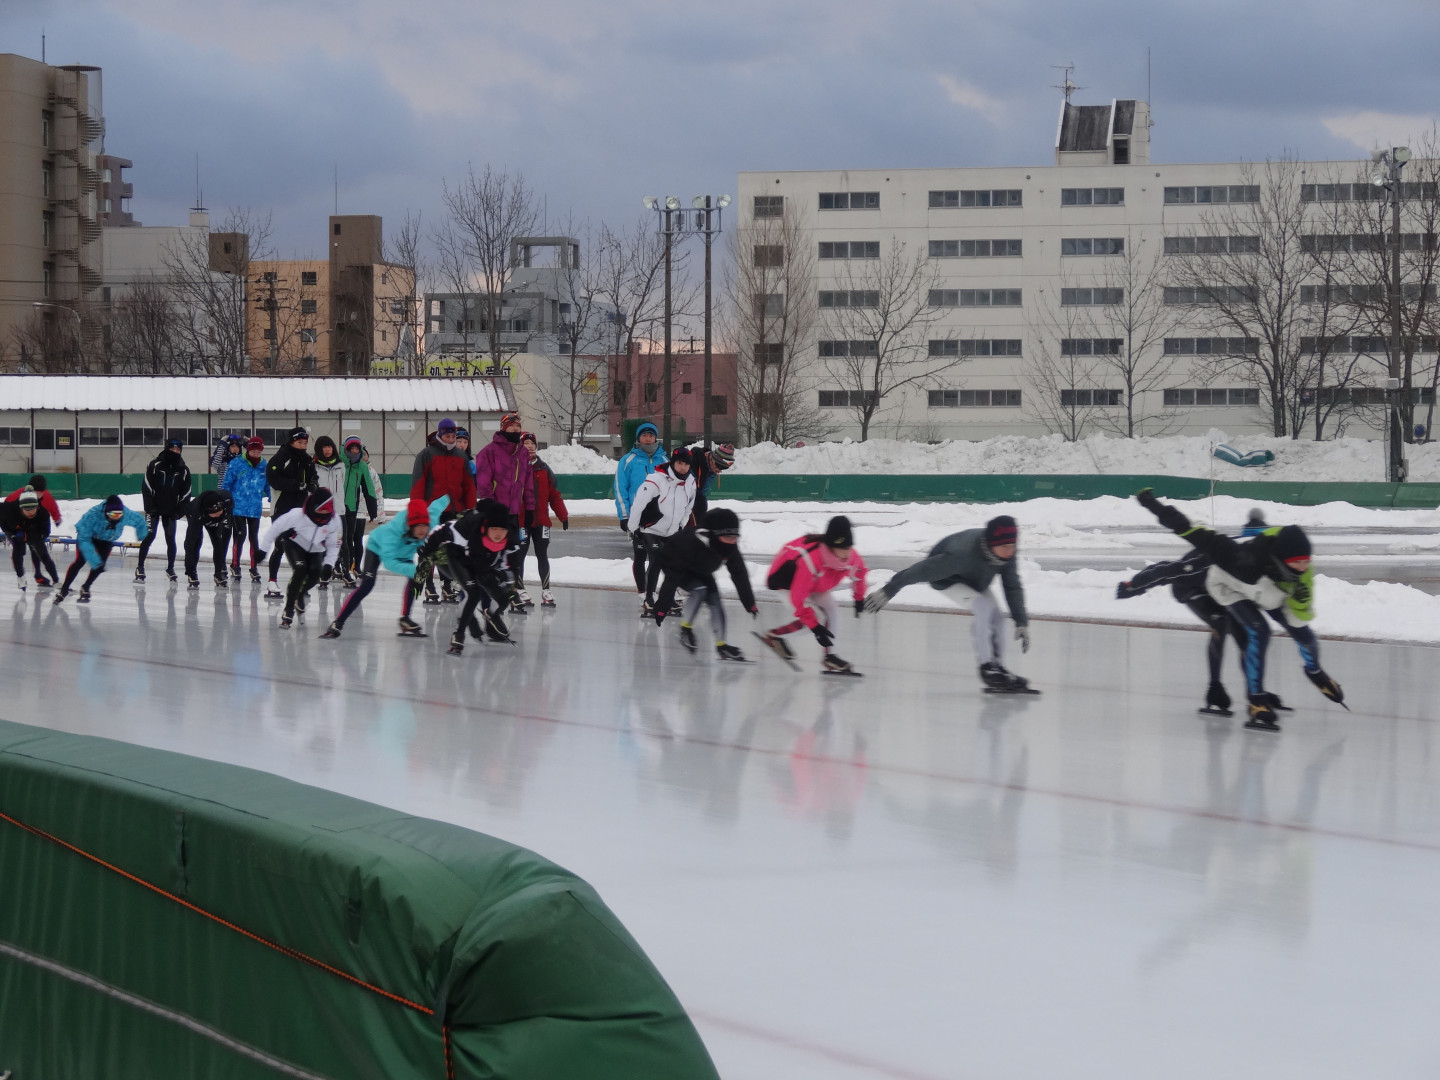 All ages can enjoy ice skating year round!